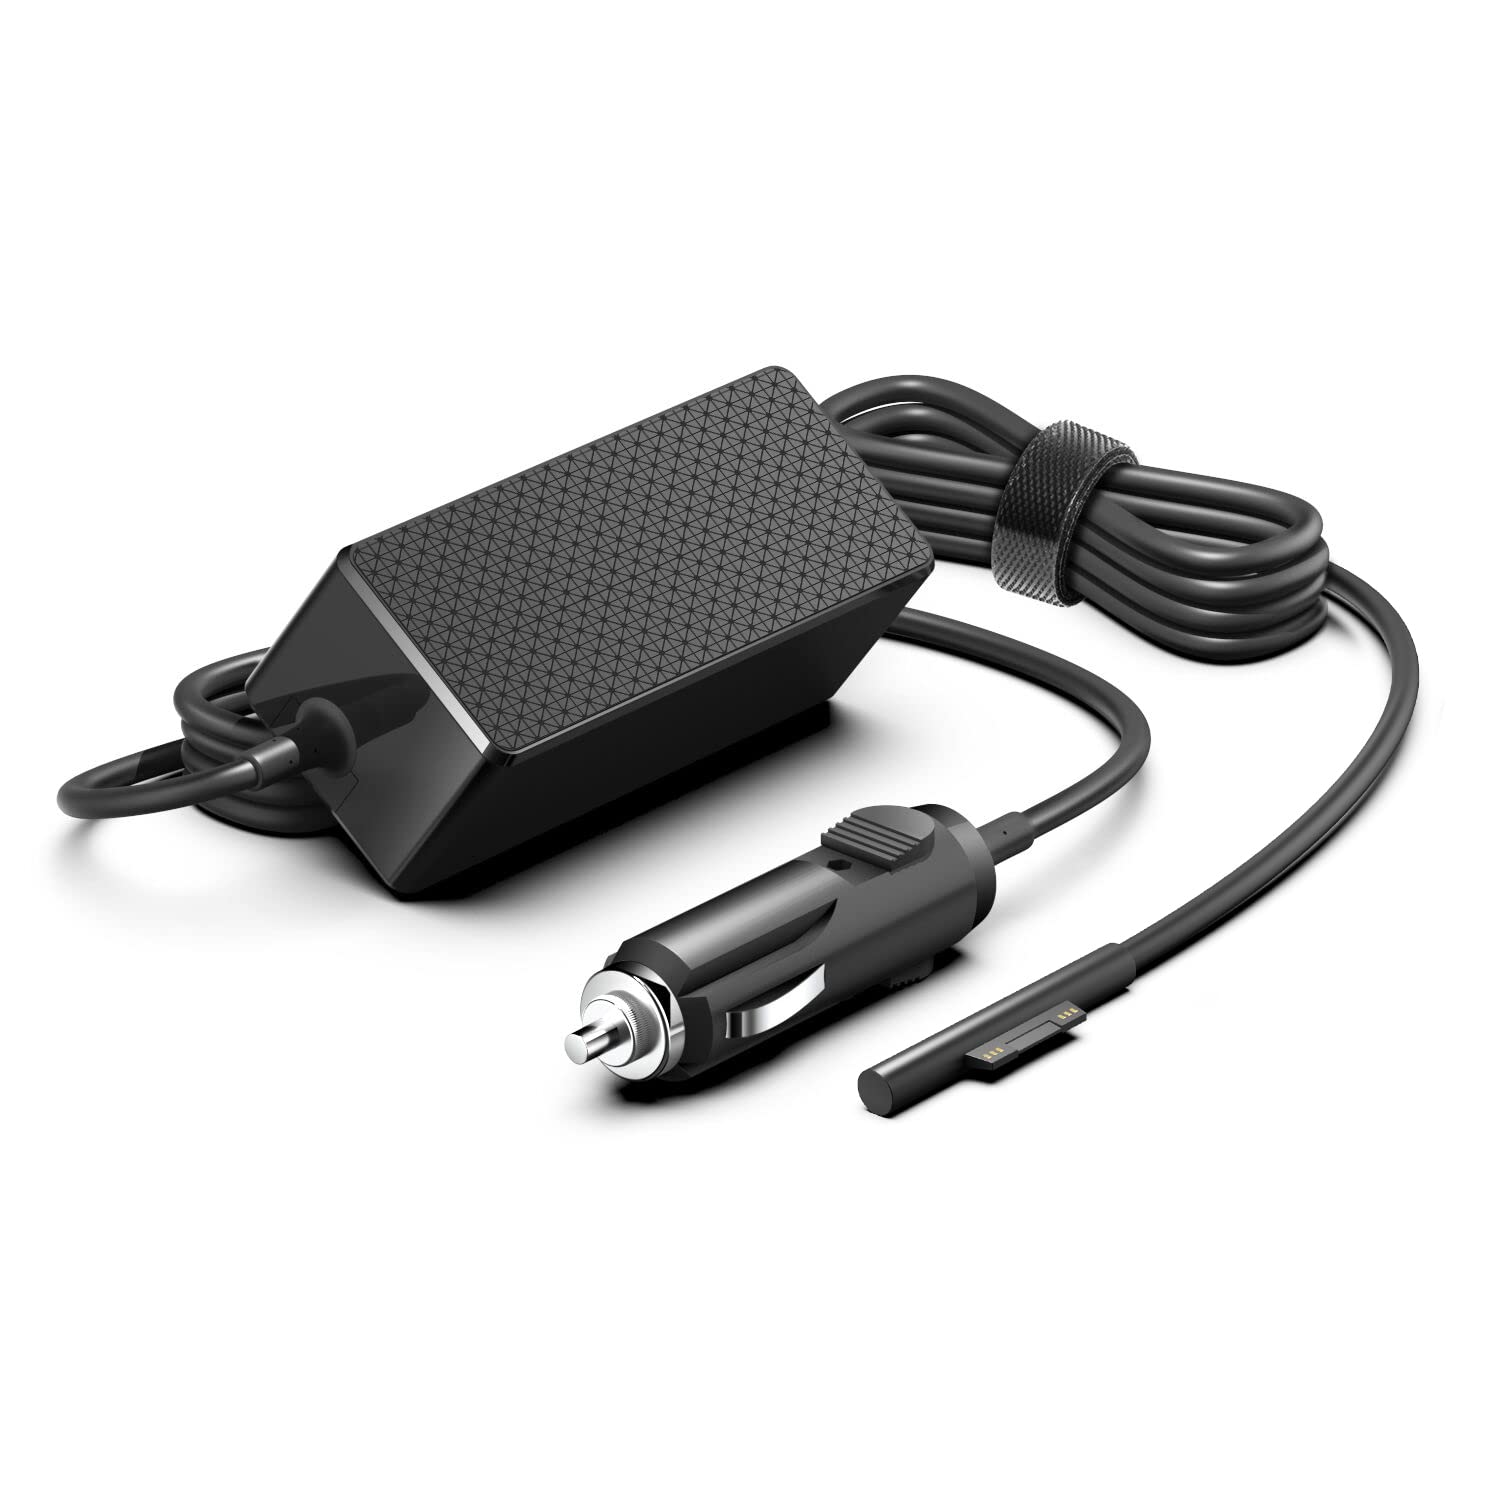 thinkstar For Surface Pro Car Charger, Dc Adapter For Microsoft Surface Pro 9 Pro 8 Pro X Pro 7 Pro 6 Surface Book 3 2 1 Surface Laptop…